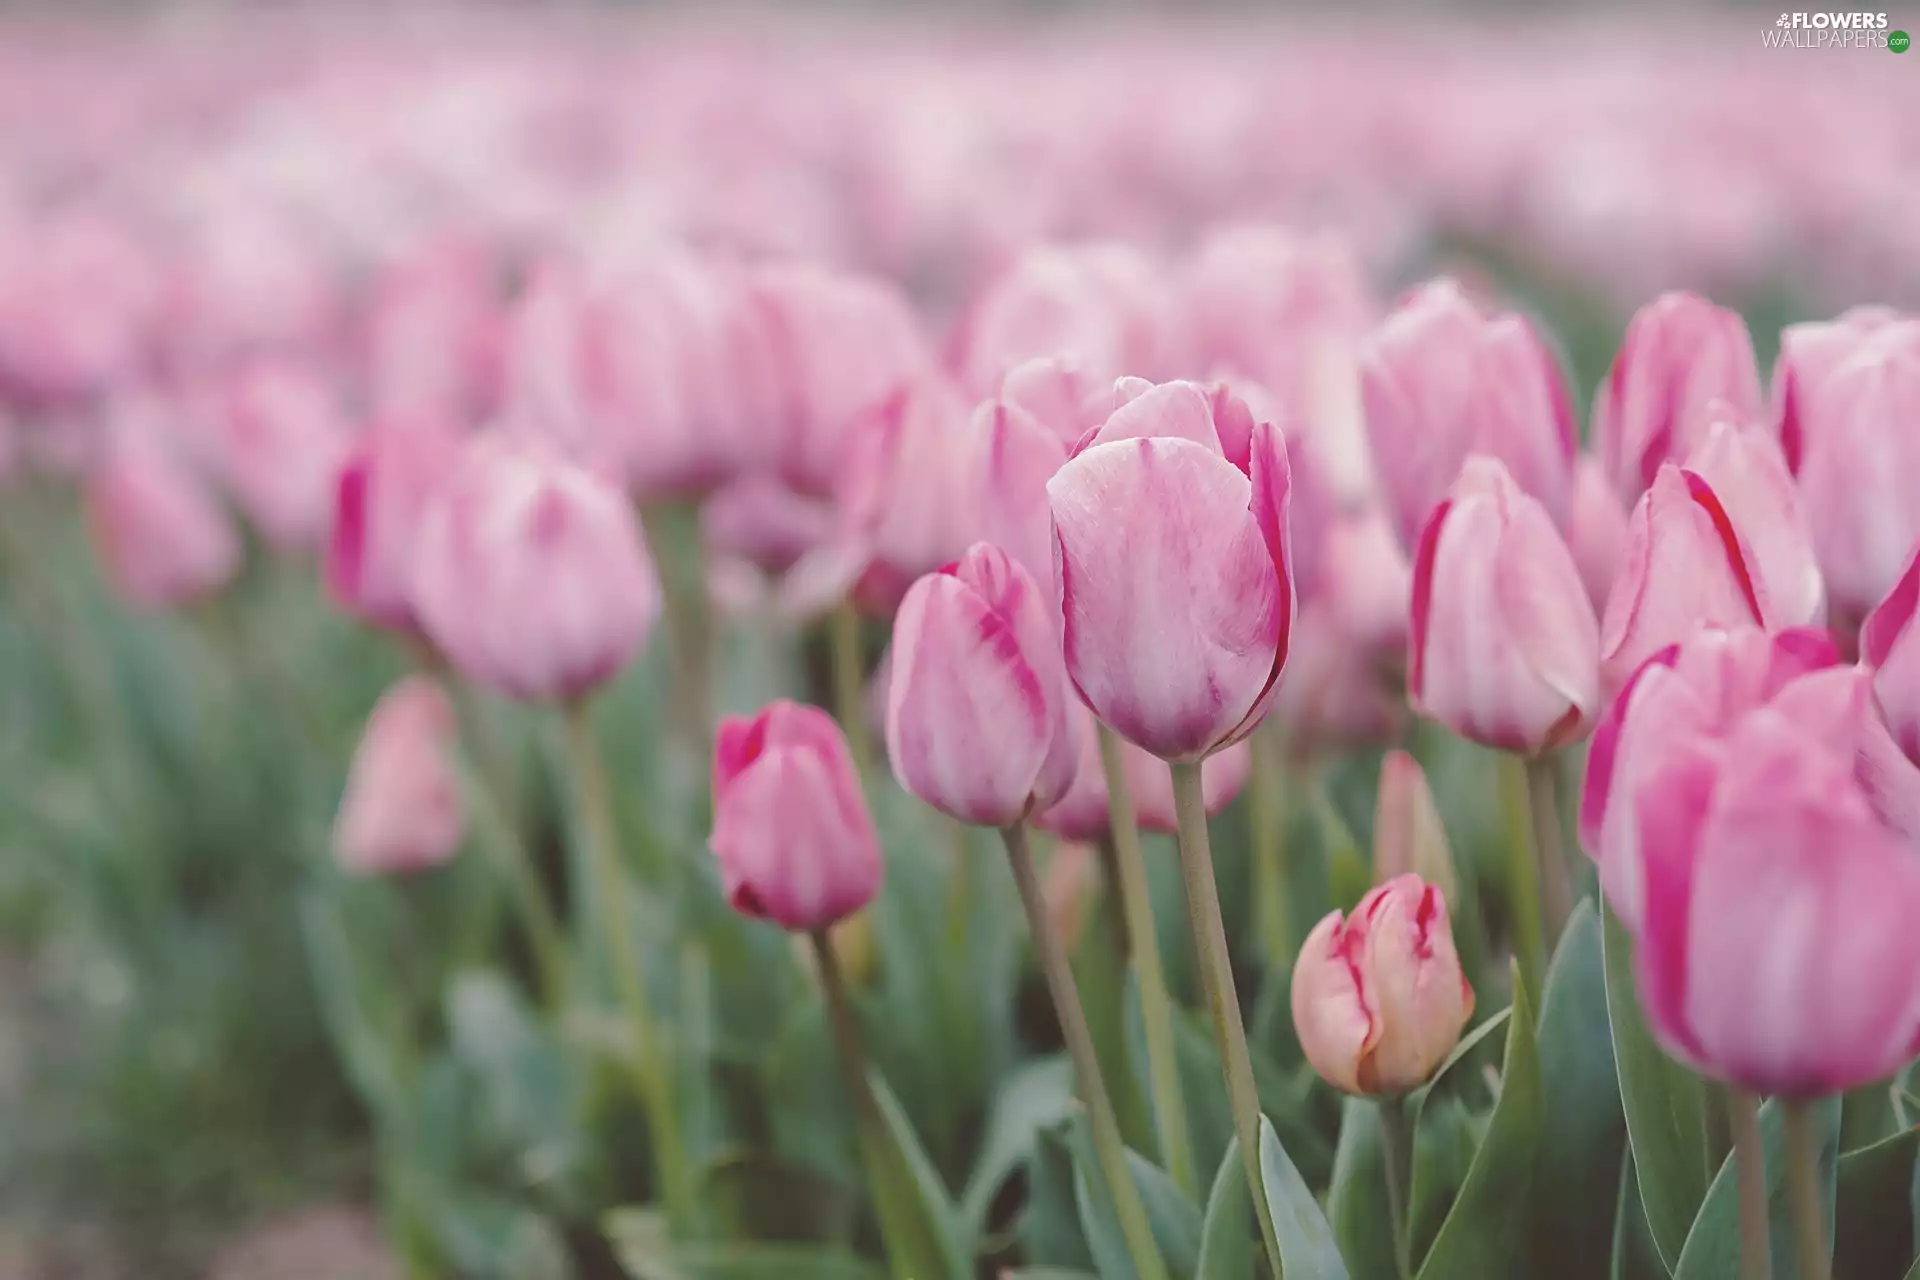 blurry background, Tulips, Meadow